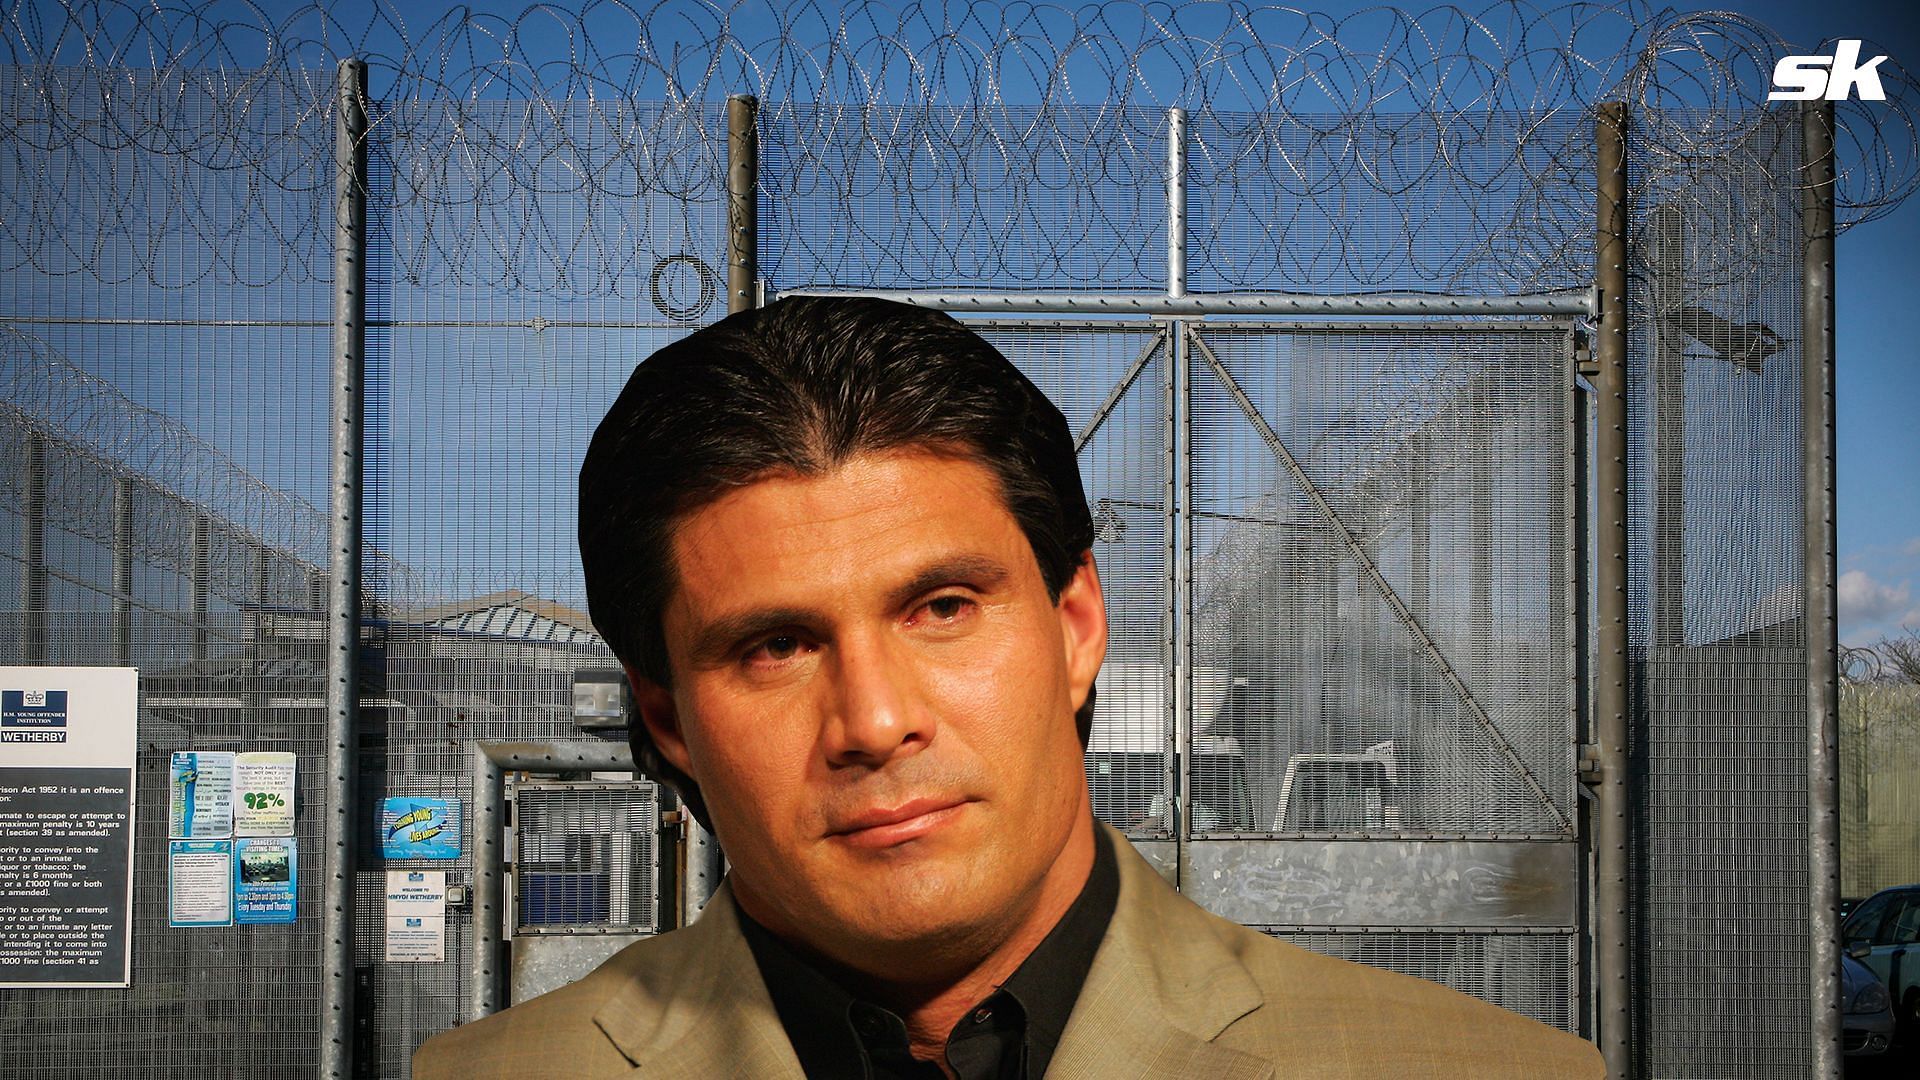 Jose Canseco, an MLB legendary player